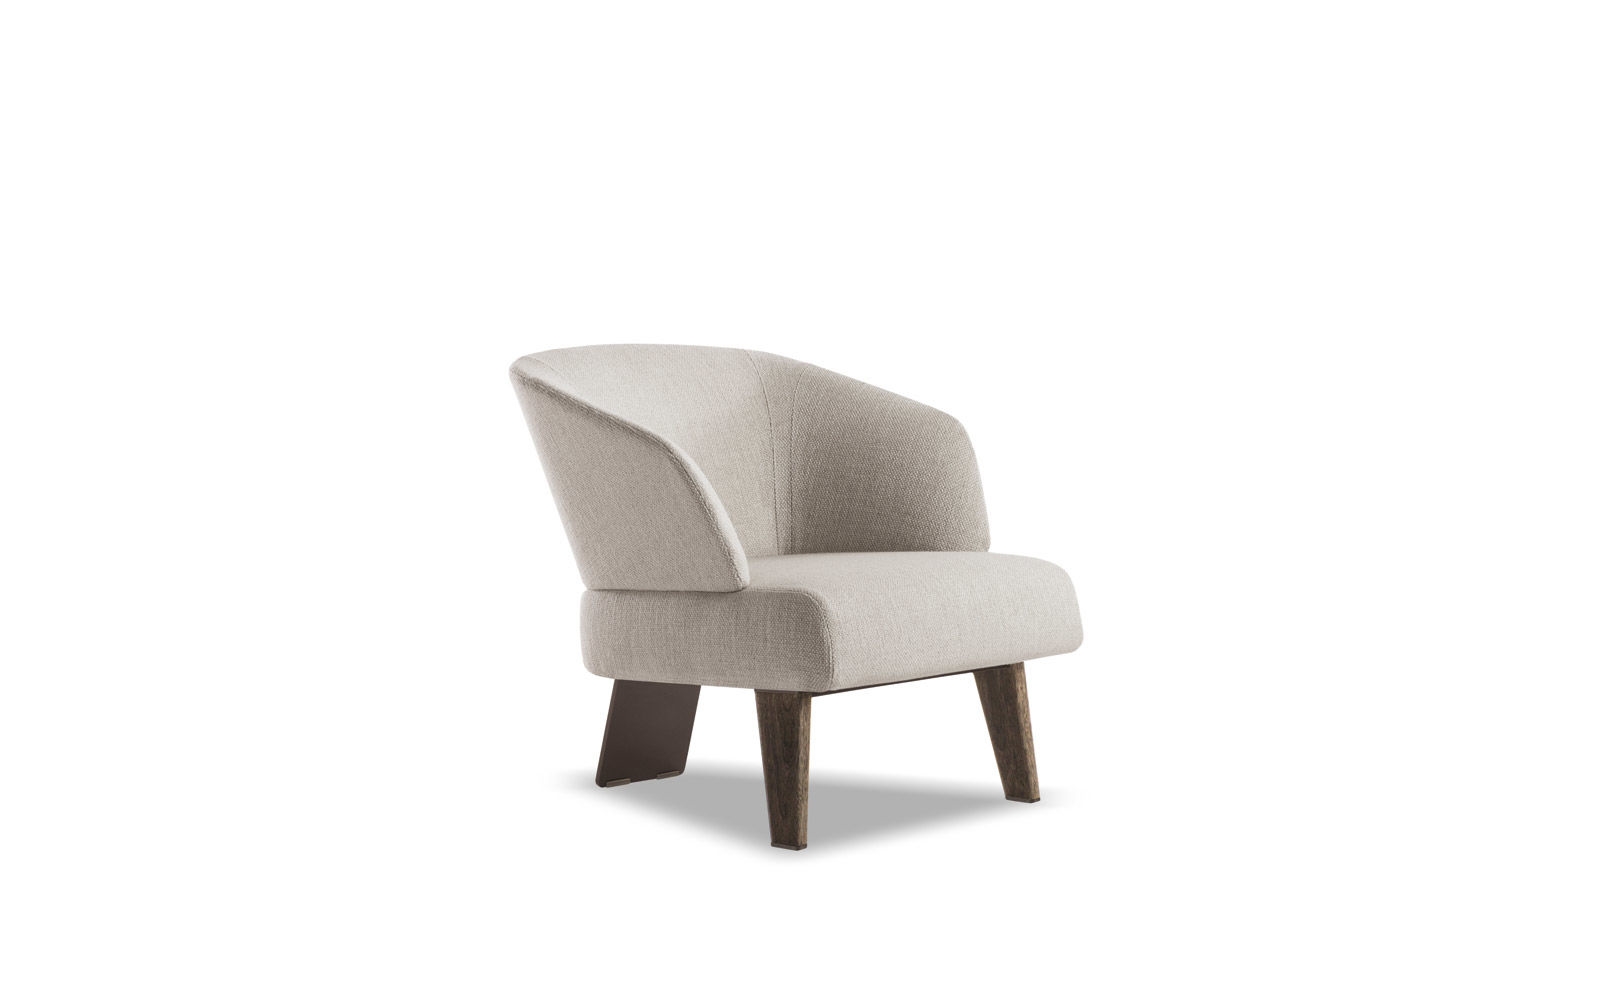 Reeves Small Armchairs En, Small Swivel Chairs With Arms